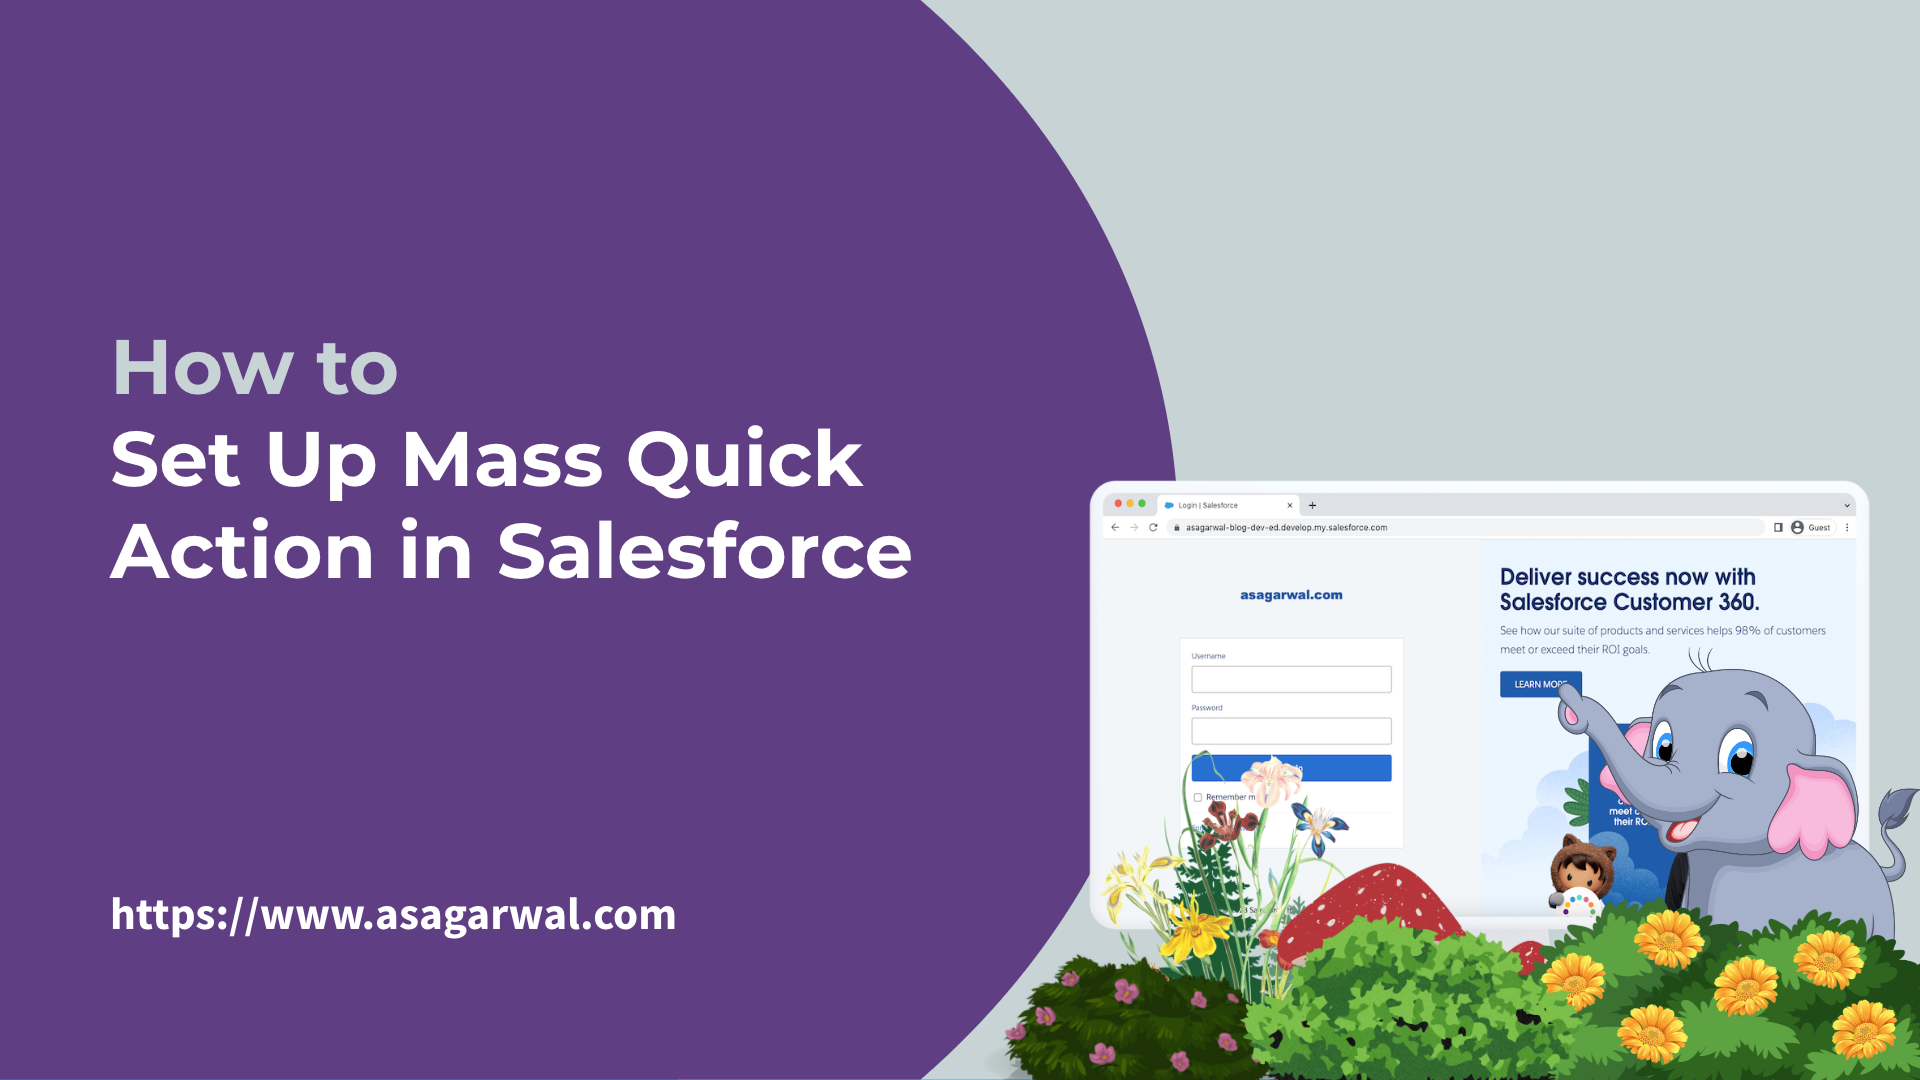 How To Set Up Mass Quick Action in Salesforce